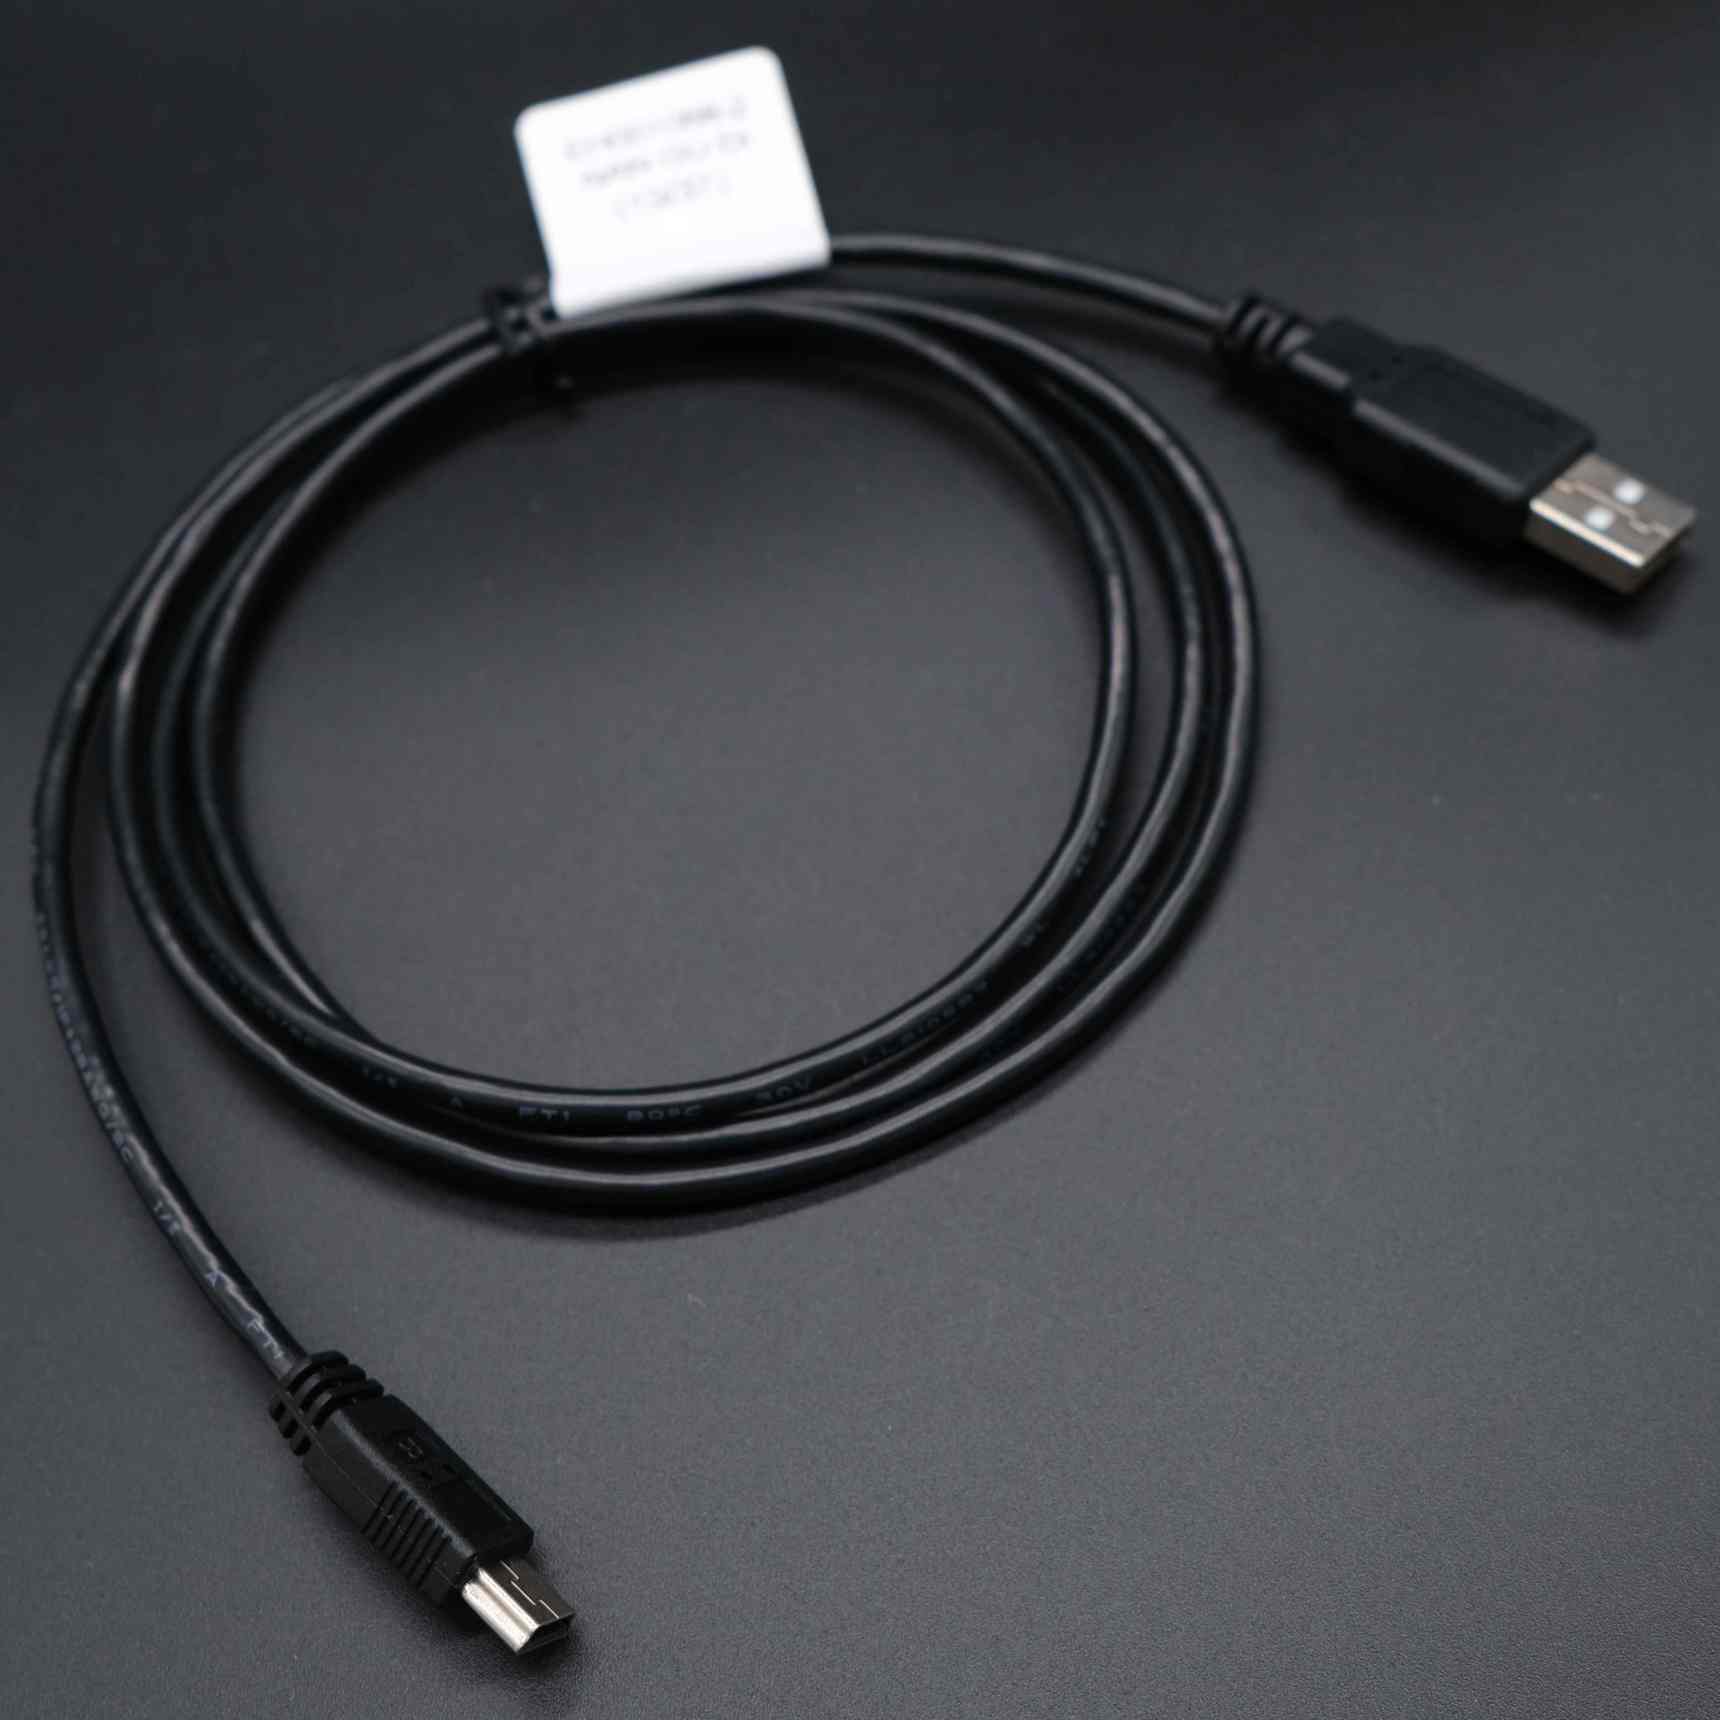 Mini USB  to USB 2.0 Fast Data Charger Cable for MP3 MP4 Player Car DVR GPS Digital Camera HDD Mini USB